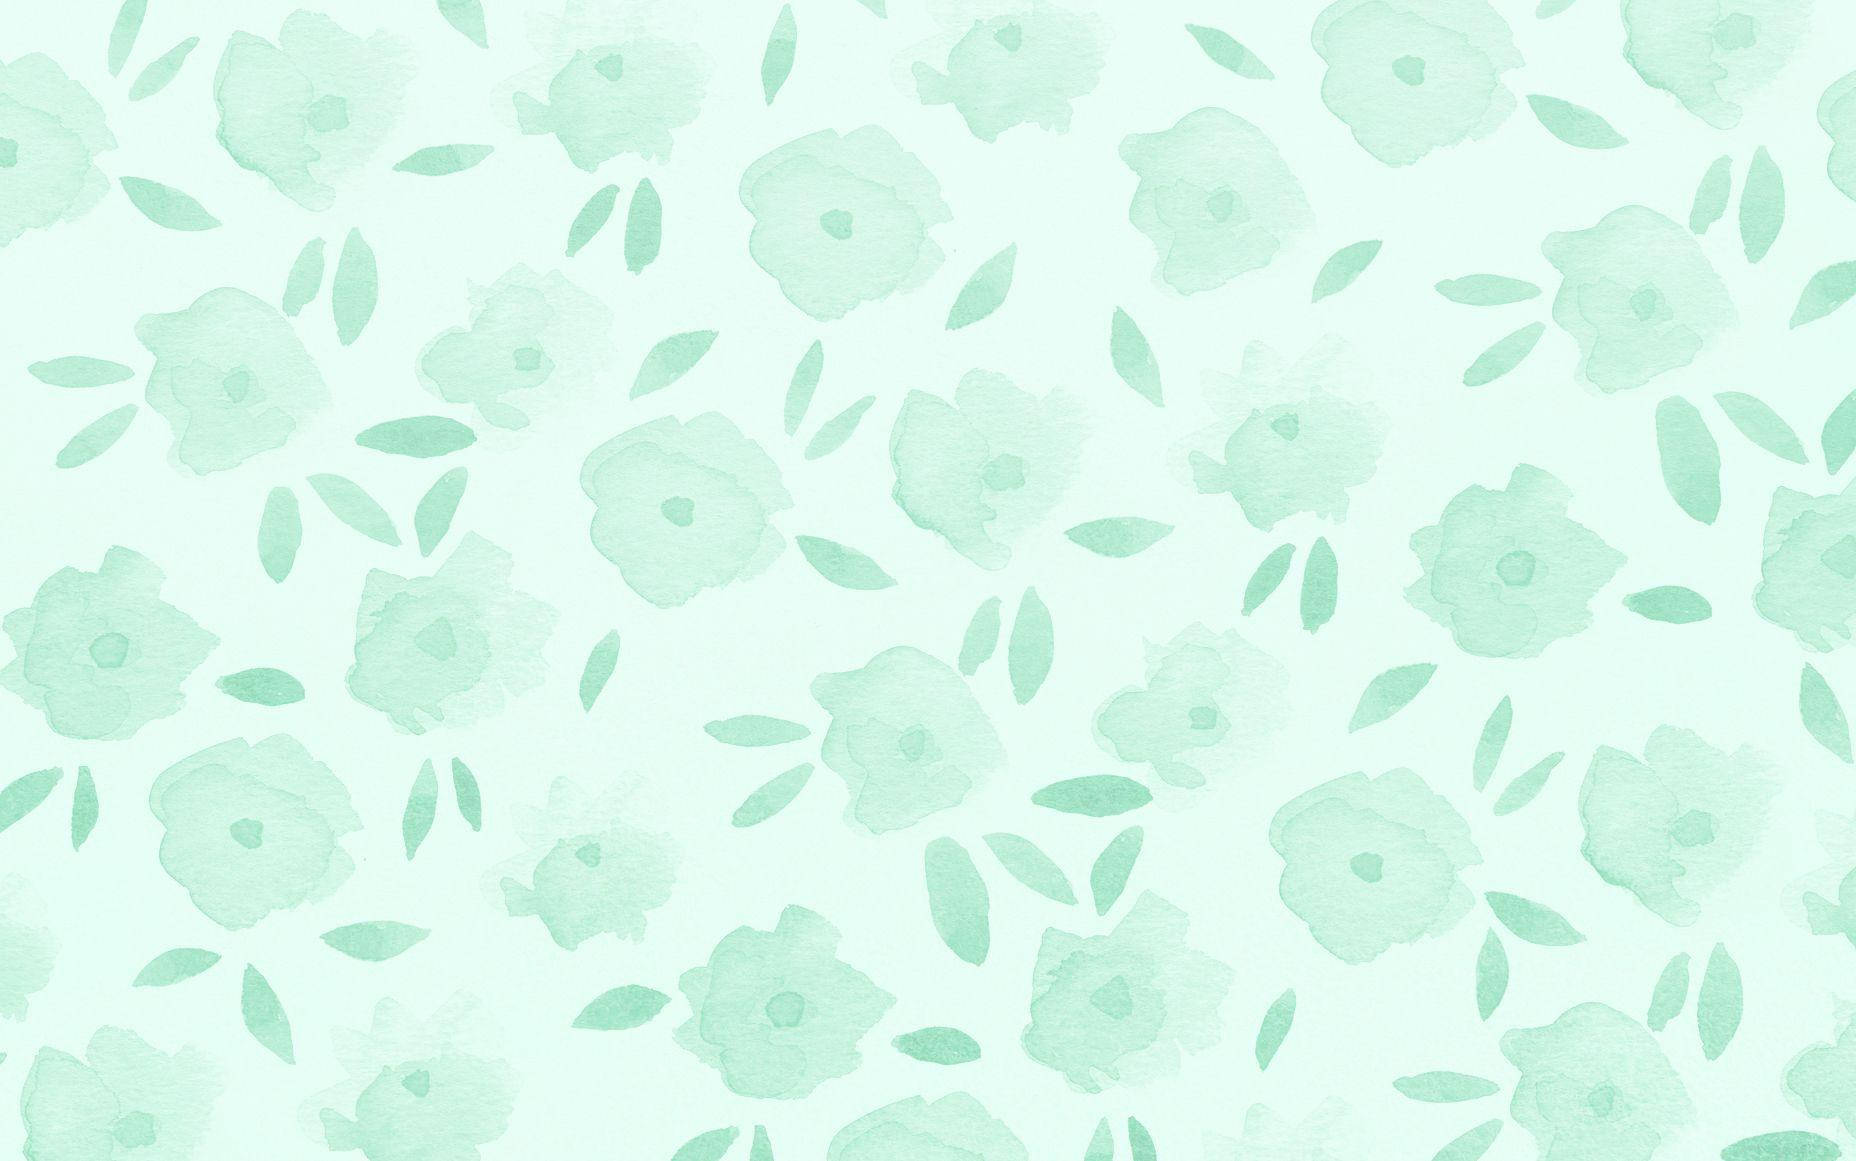 Delightful Digital Aesthetic Teal Smudgy Roses Wallpaper